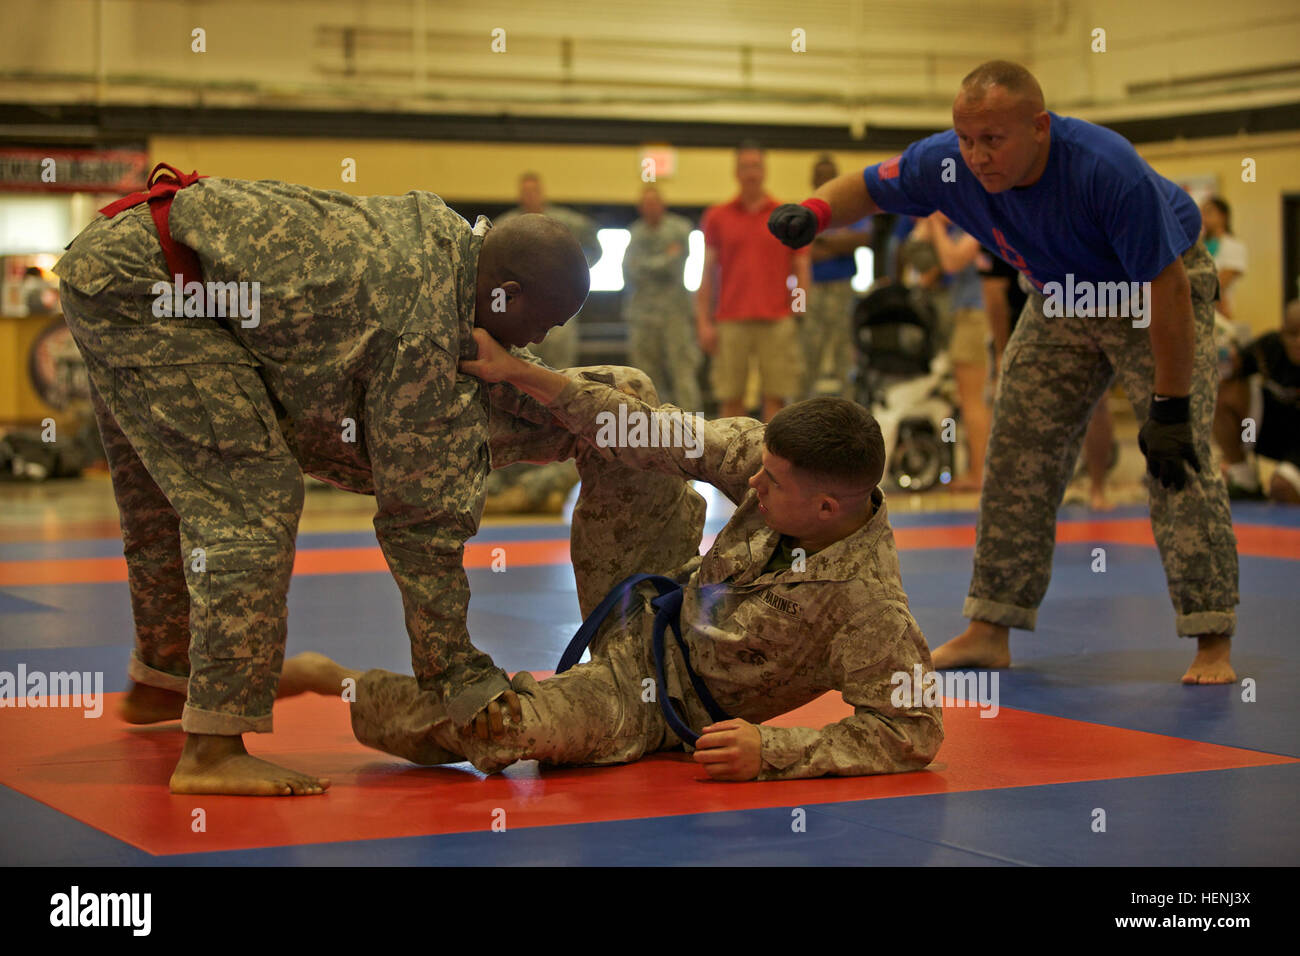 A U.S. Army Soldier and U.S. Marine fight head to head while being observed by a referee during an Army Combatives Tournament at Fort Dix, N.J., June 7, 2014. This tournament includes Soldiers, Airmen and Marines competing in different weight classes for a chance to win the title. (U.S. Army photo by Sgt. Austin Berner/Released) 98th Division Army Combatives Tournament 140607-A-BZ540-202 Stock Photo